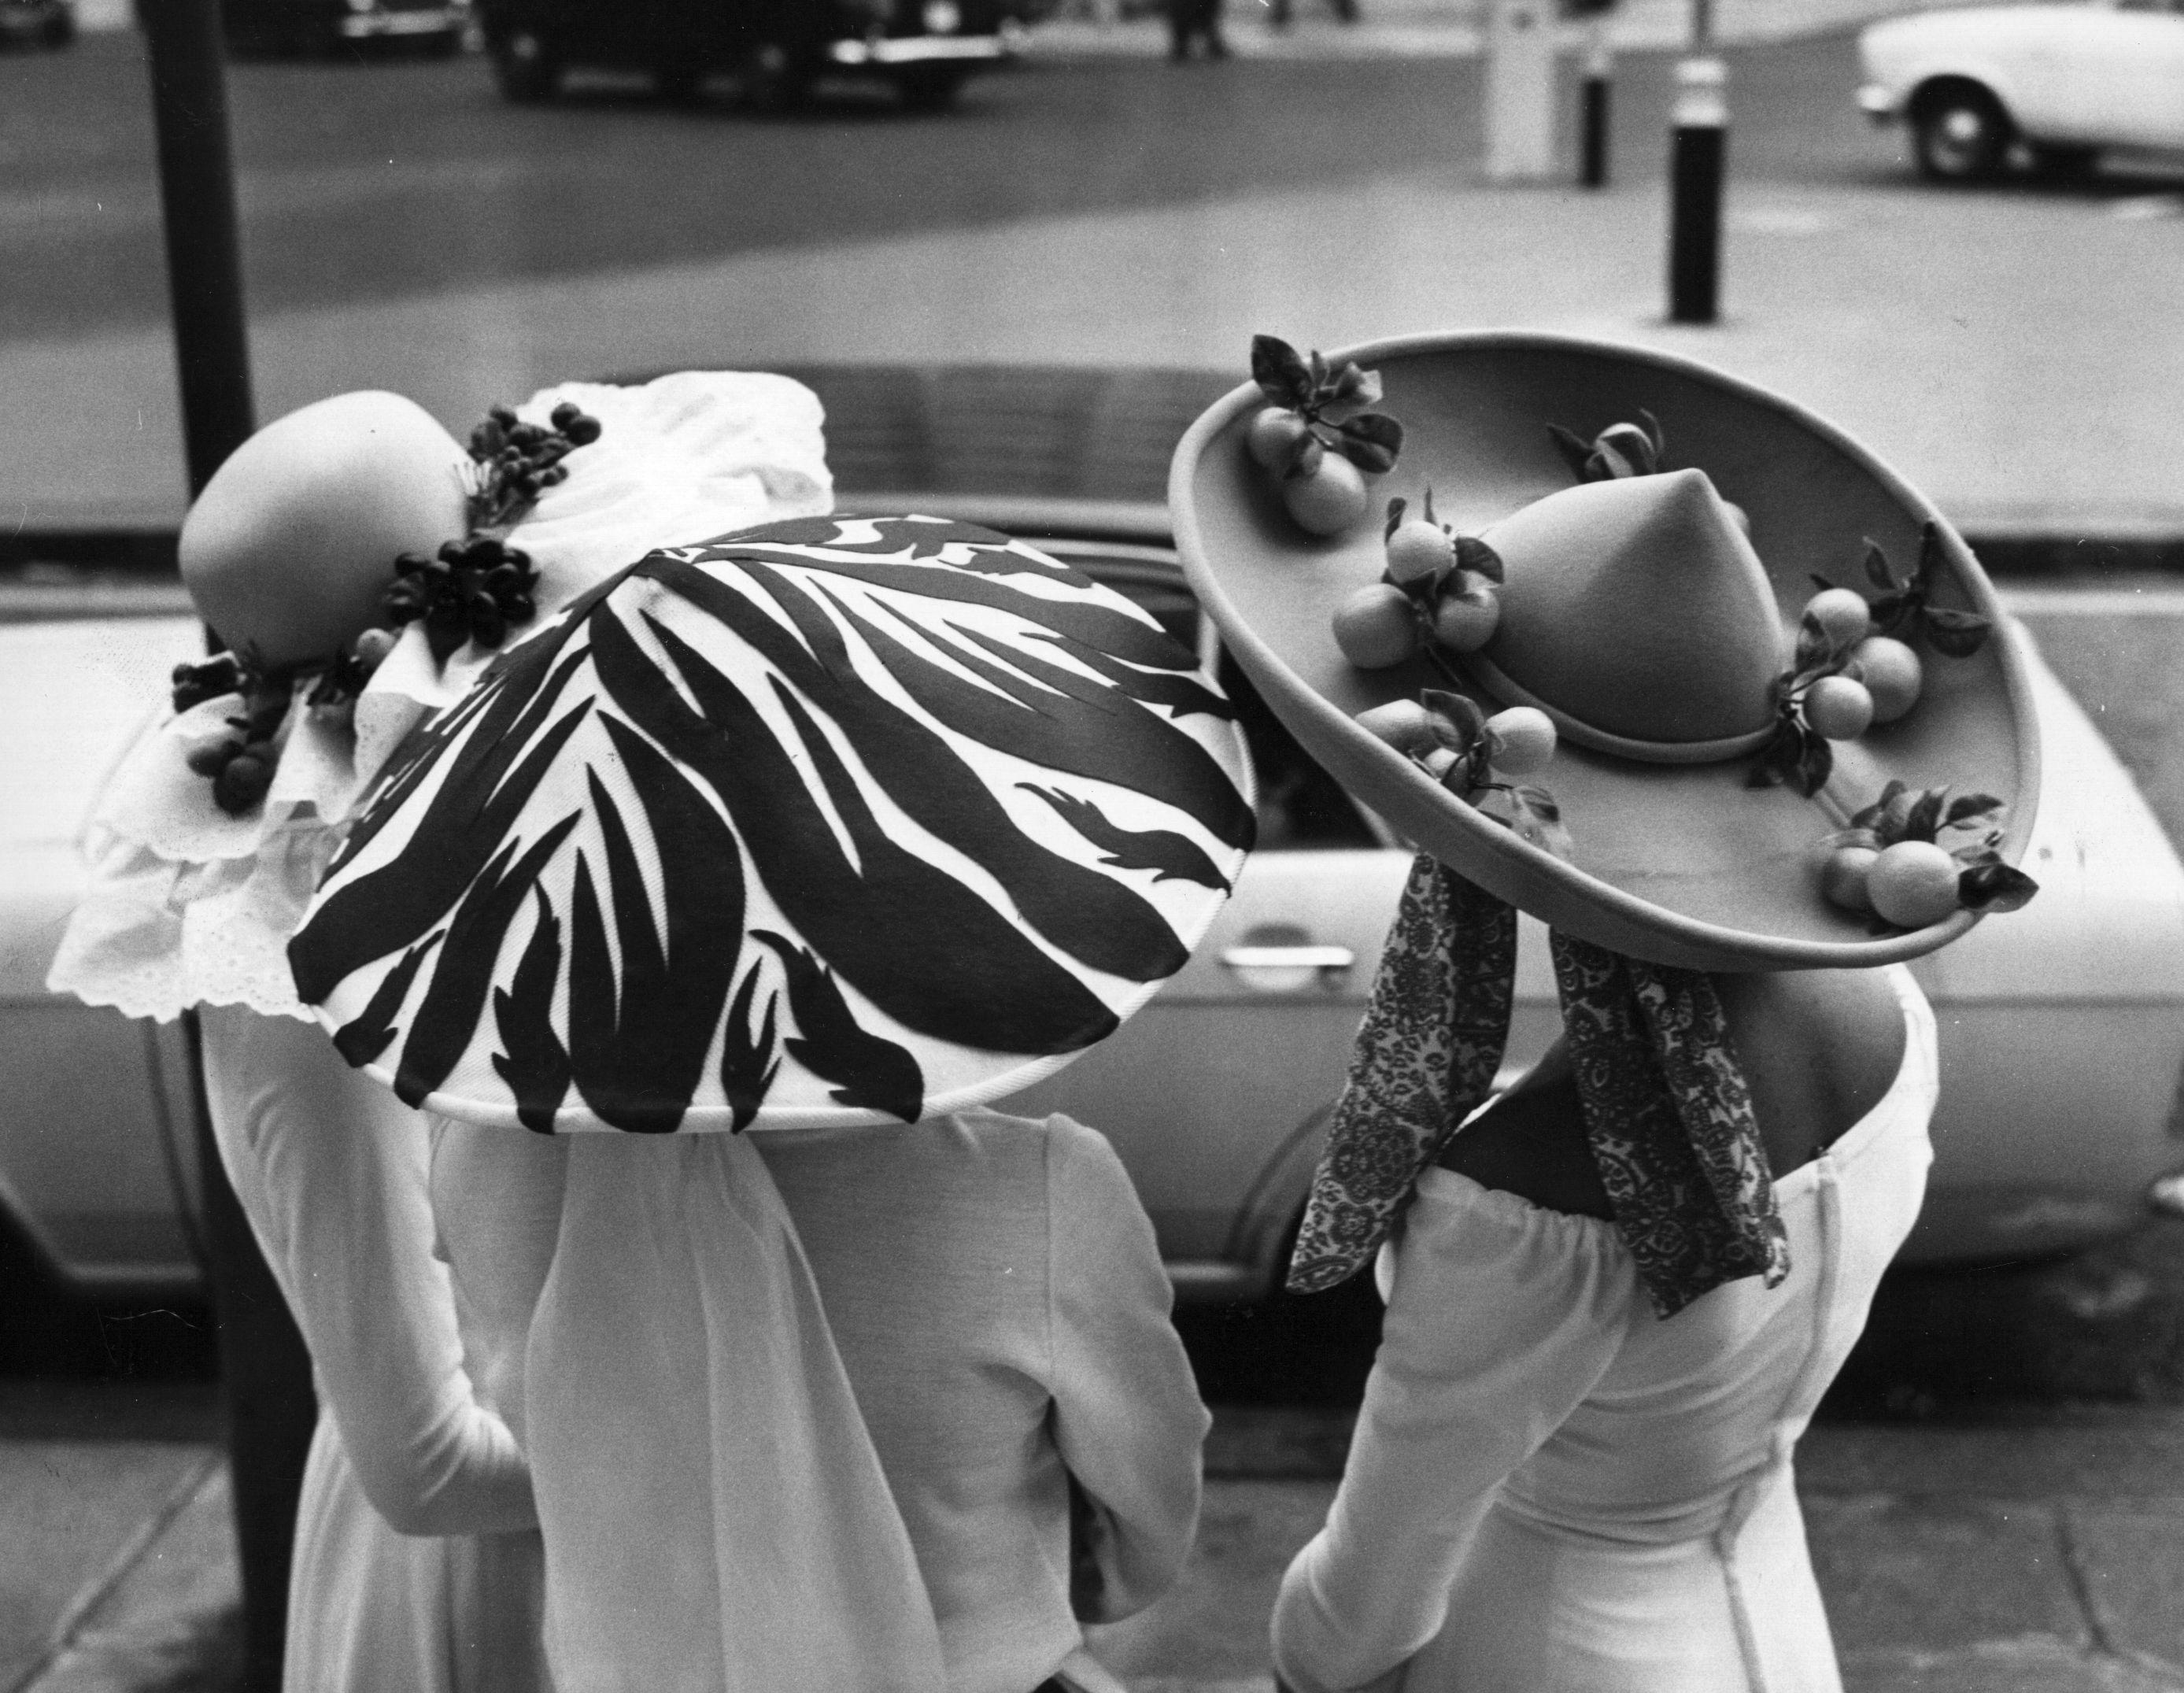 Sydney O'Meara Black and White Photograph - Easter Bonnets, 1970s, Silver Gelatin, Archival, Limited, Hats, Fashion 